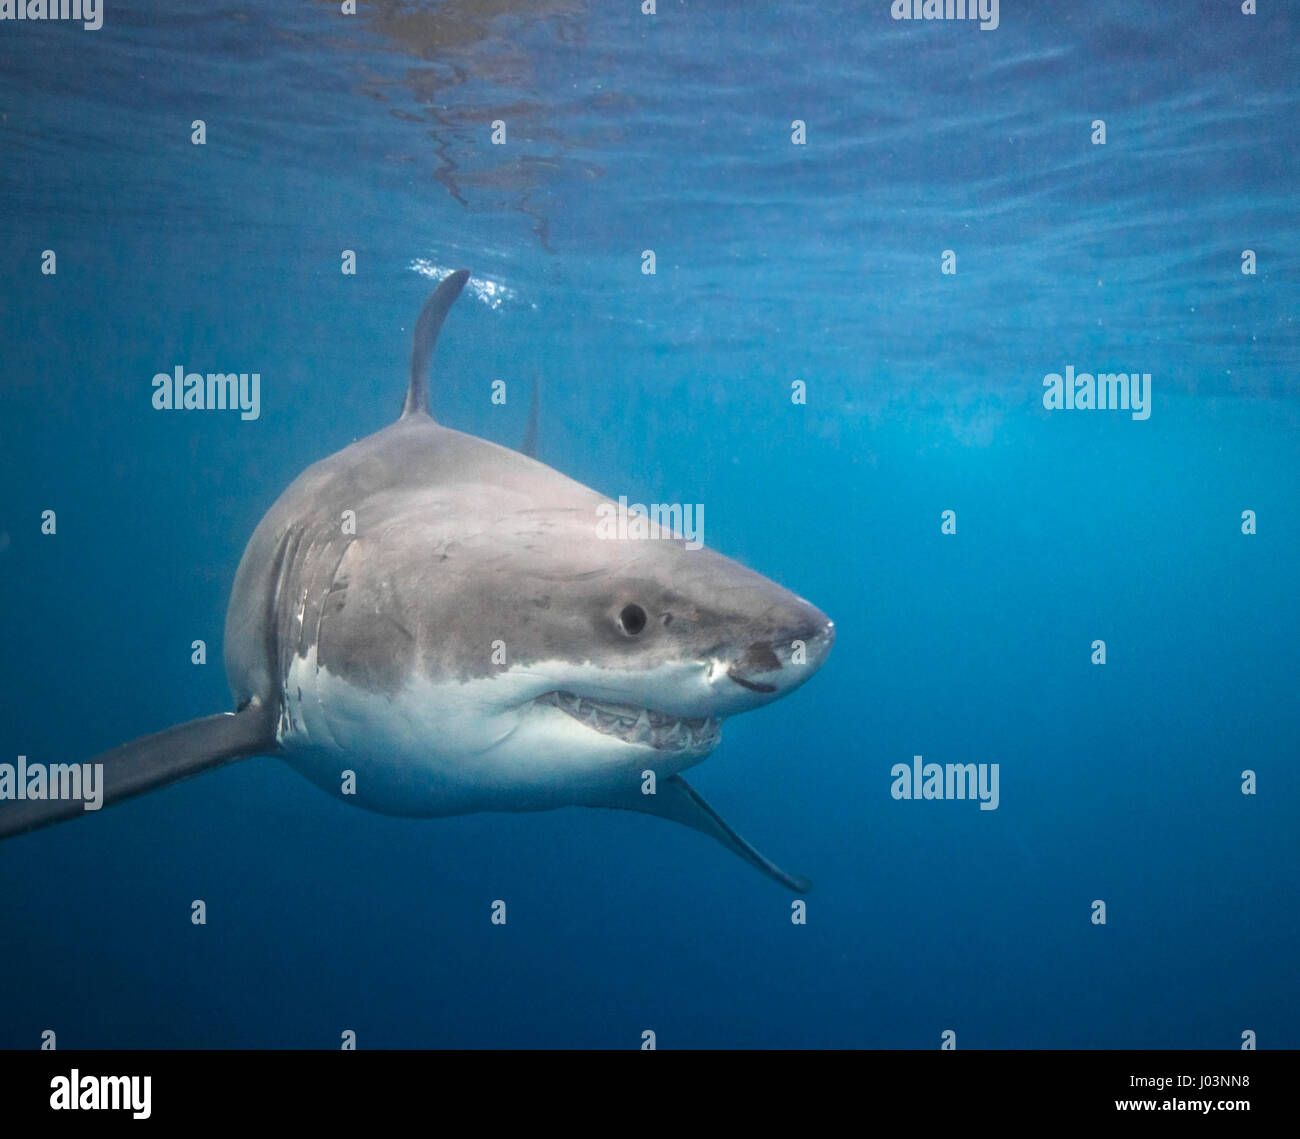 GUADALUPE, MEXICO: TERRIFYING close-up images of a deadly fifteen-foot long Great White Shark biting into one shocked diver’s air supply have been captured. The series of spectacular pictures show the 1,500-pound predator as it approached the diver’s cage in pursuit of a piece of bait that had floated near the air supply, before accidently chomping its sharp teeth down onto the air hose to gobble up the bait. The shots were taken by extreme underwater photographer, Chris Gillette (29) from Fort Lauderdale, USA in Guadalupe, Mexico. Chris managed to take the photos using a Canon 70D camera equi Stock Photo